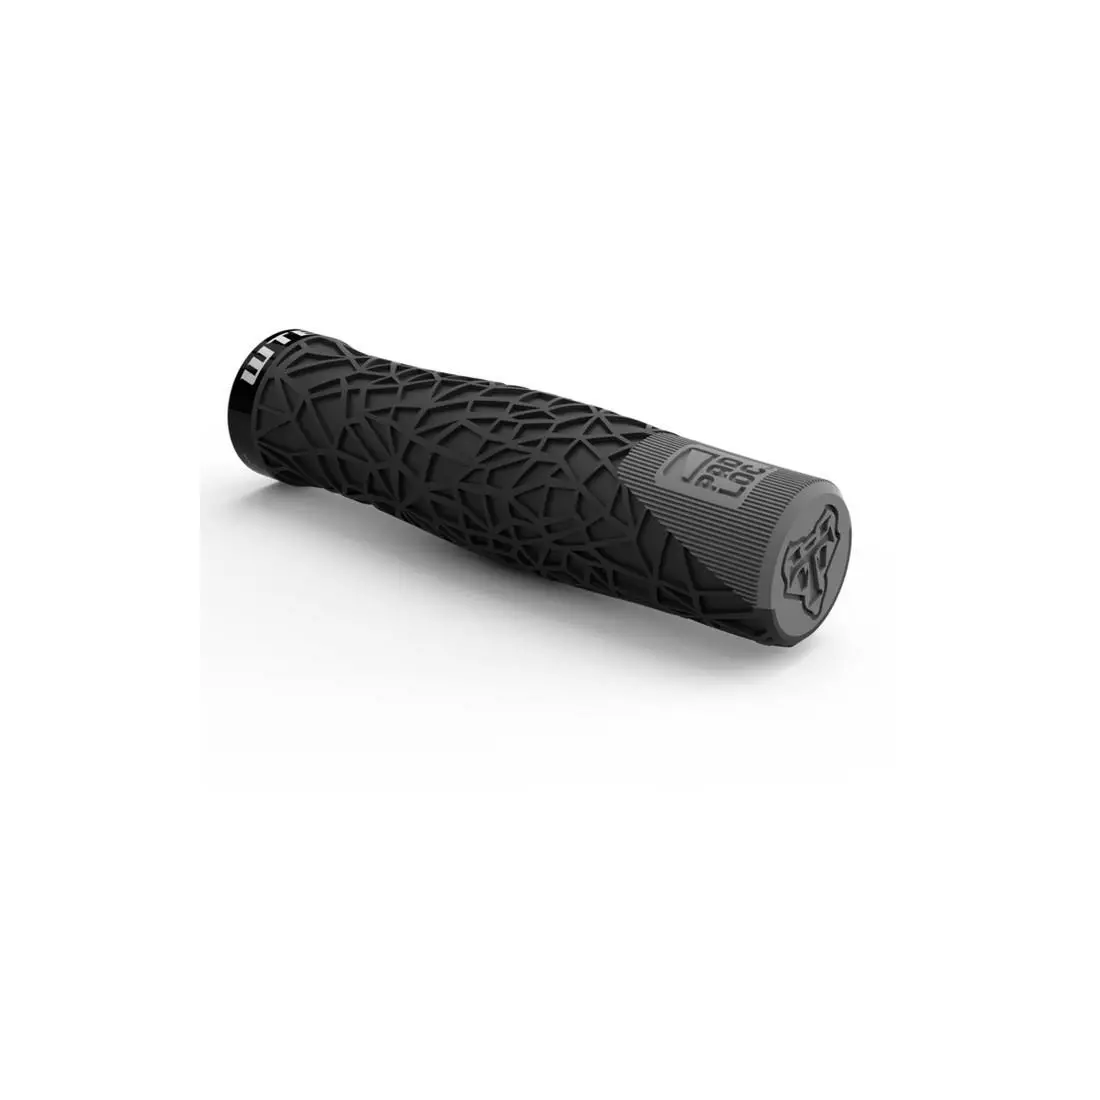 WTB Bicycle grips PADLOC ACE black and gray, W075-0046